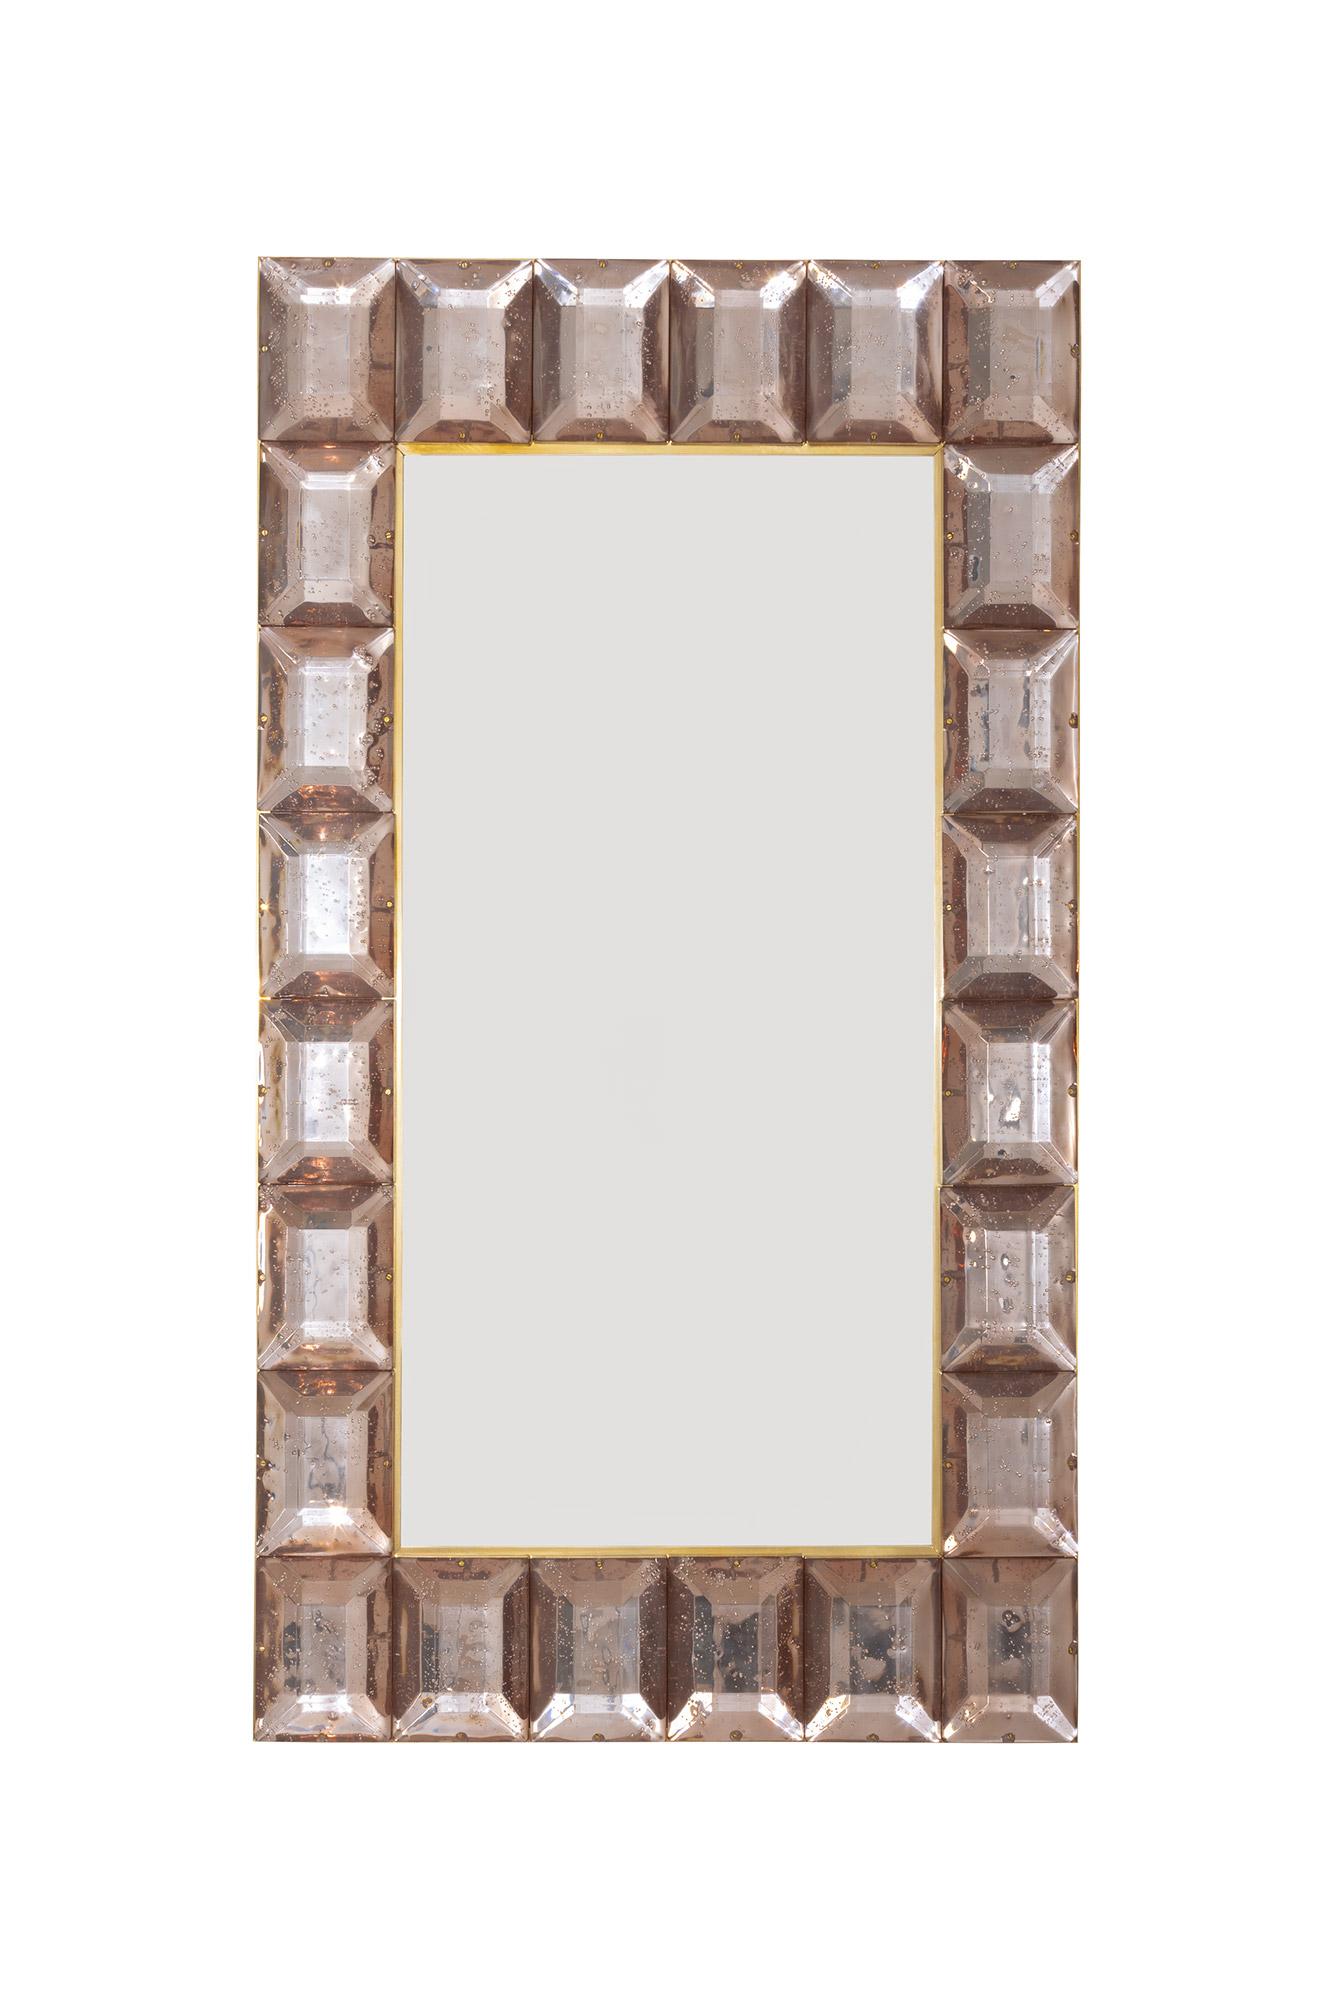 Large pink diamond cut Murano glass mirrors, in stock.
 Contemporary and customizable mirror with a faceted blush pink Murano glass frame, edged in brass and luxury handcrafted by a team of artisans in Venice, Italy. Each pink glass has a highly